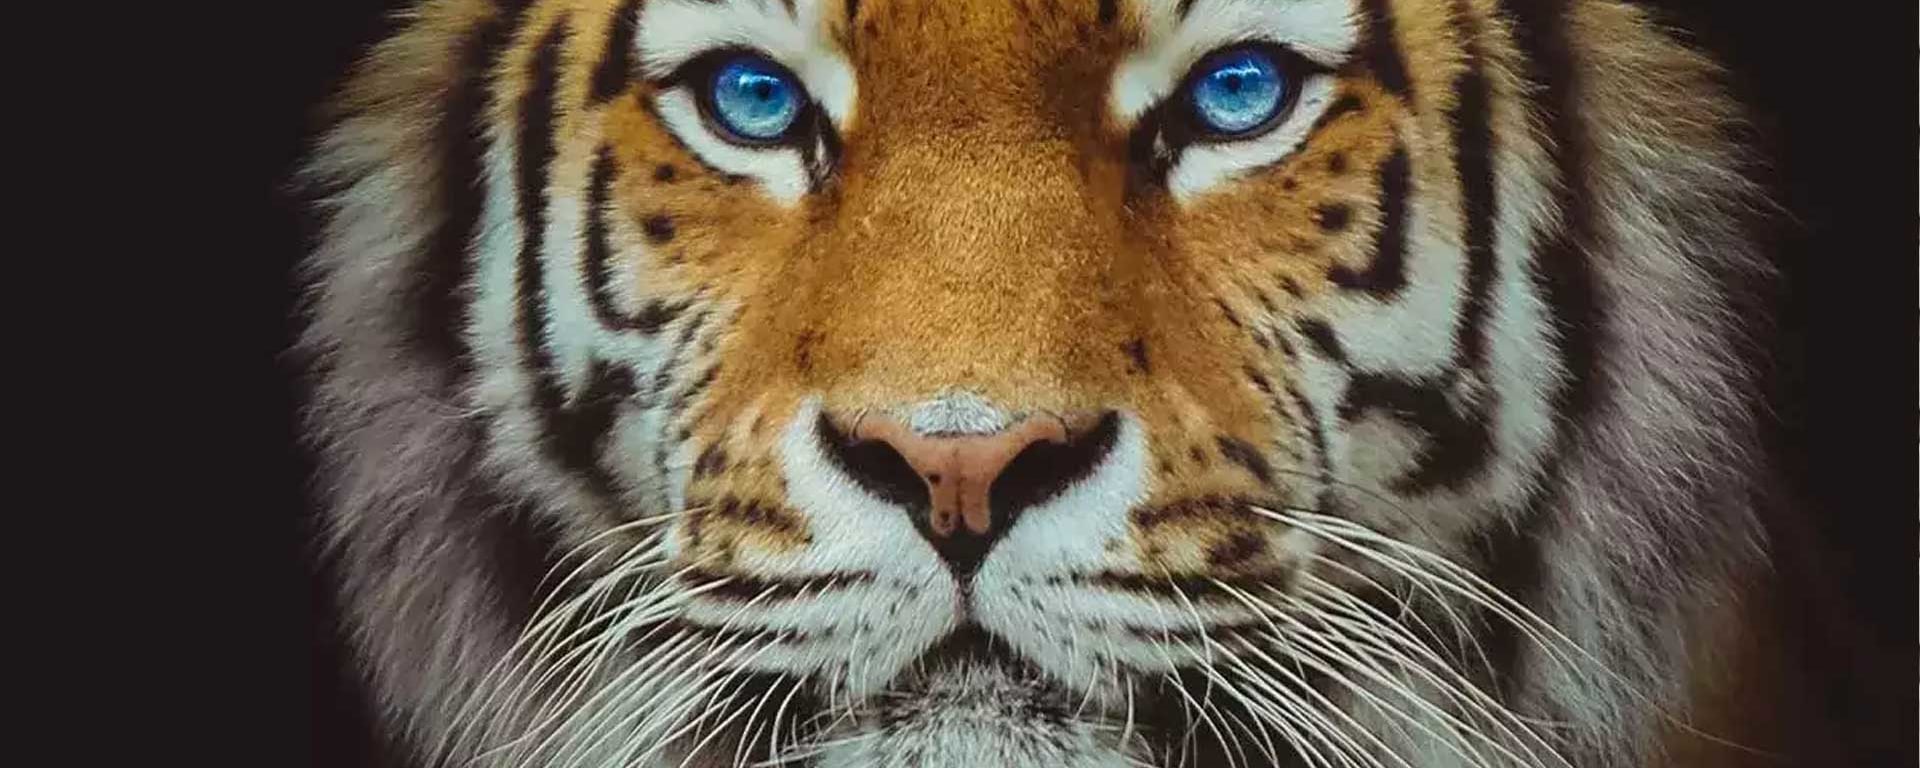 A tiger symbolizes deritrade - our issuance platform for structured products